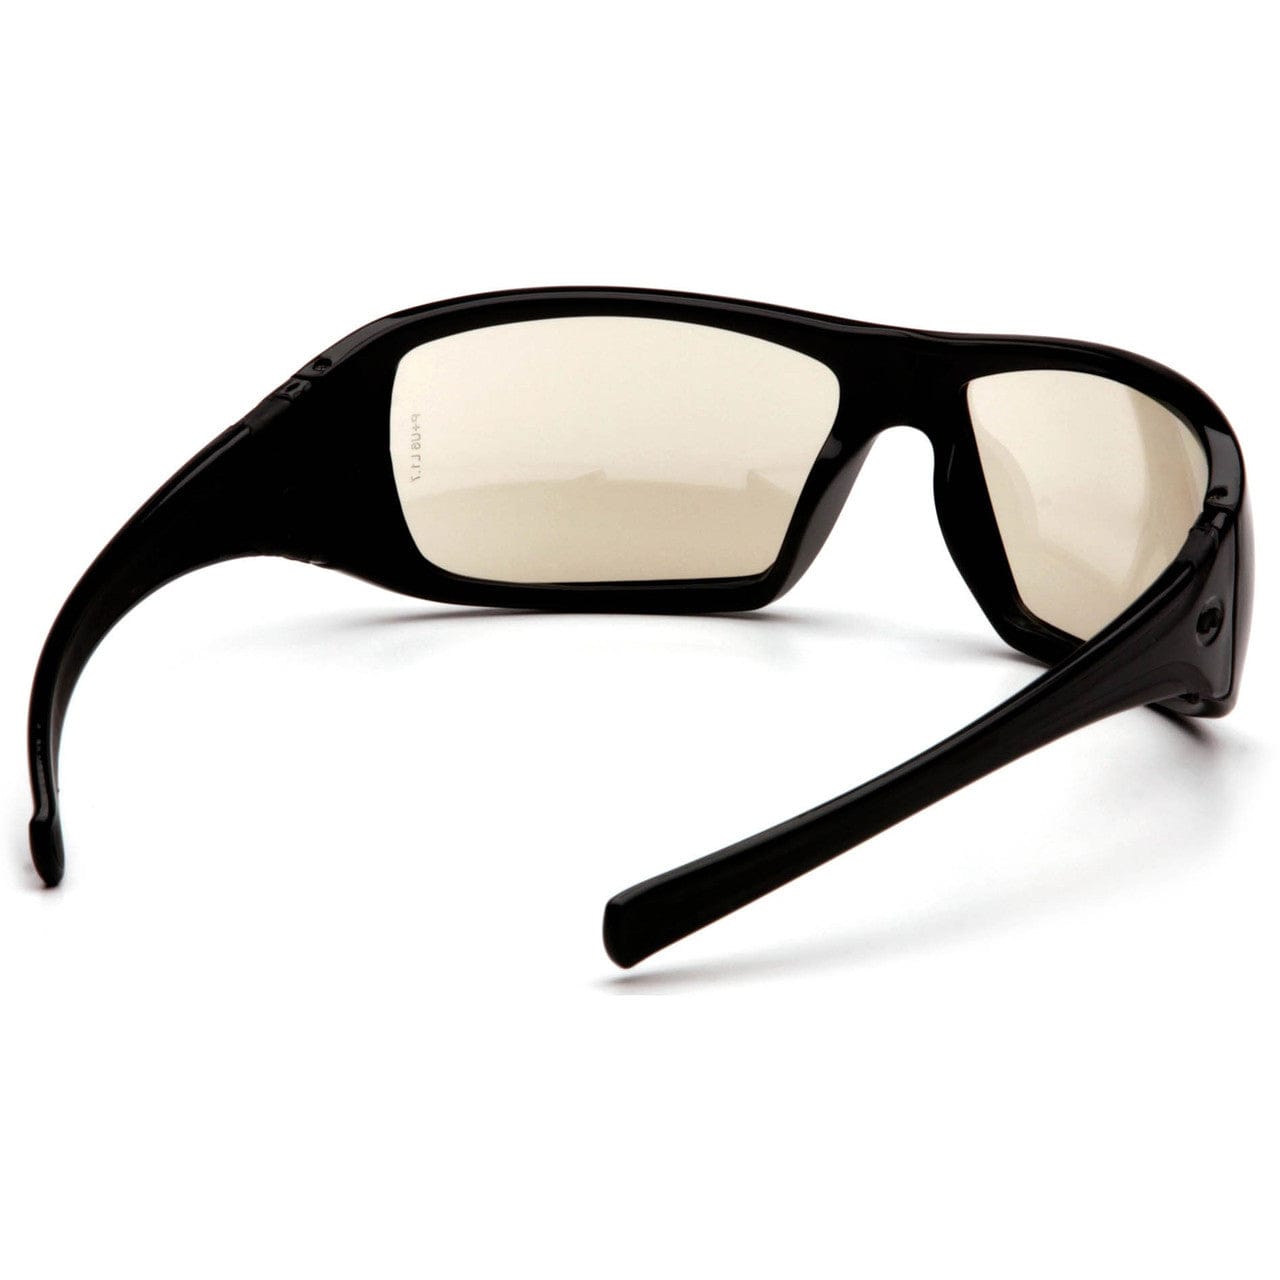 Pyramex Goliath Safety Glasses with Black Frame and Indoor/Outdoor Lens SB5680D Inside View